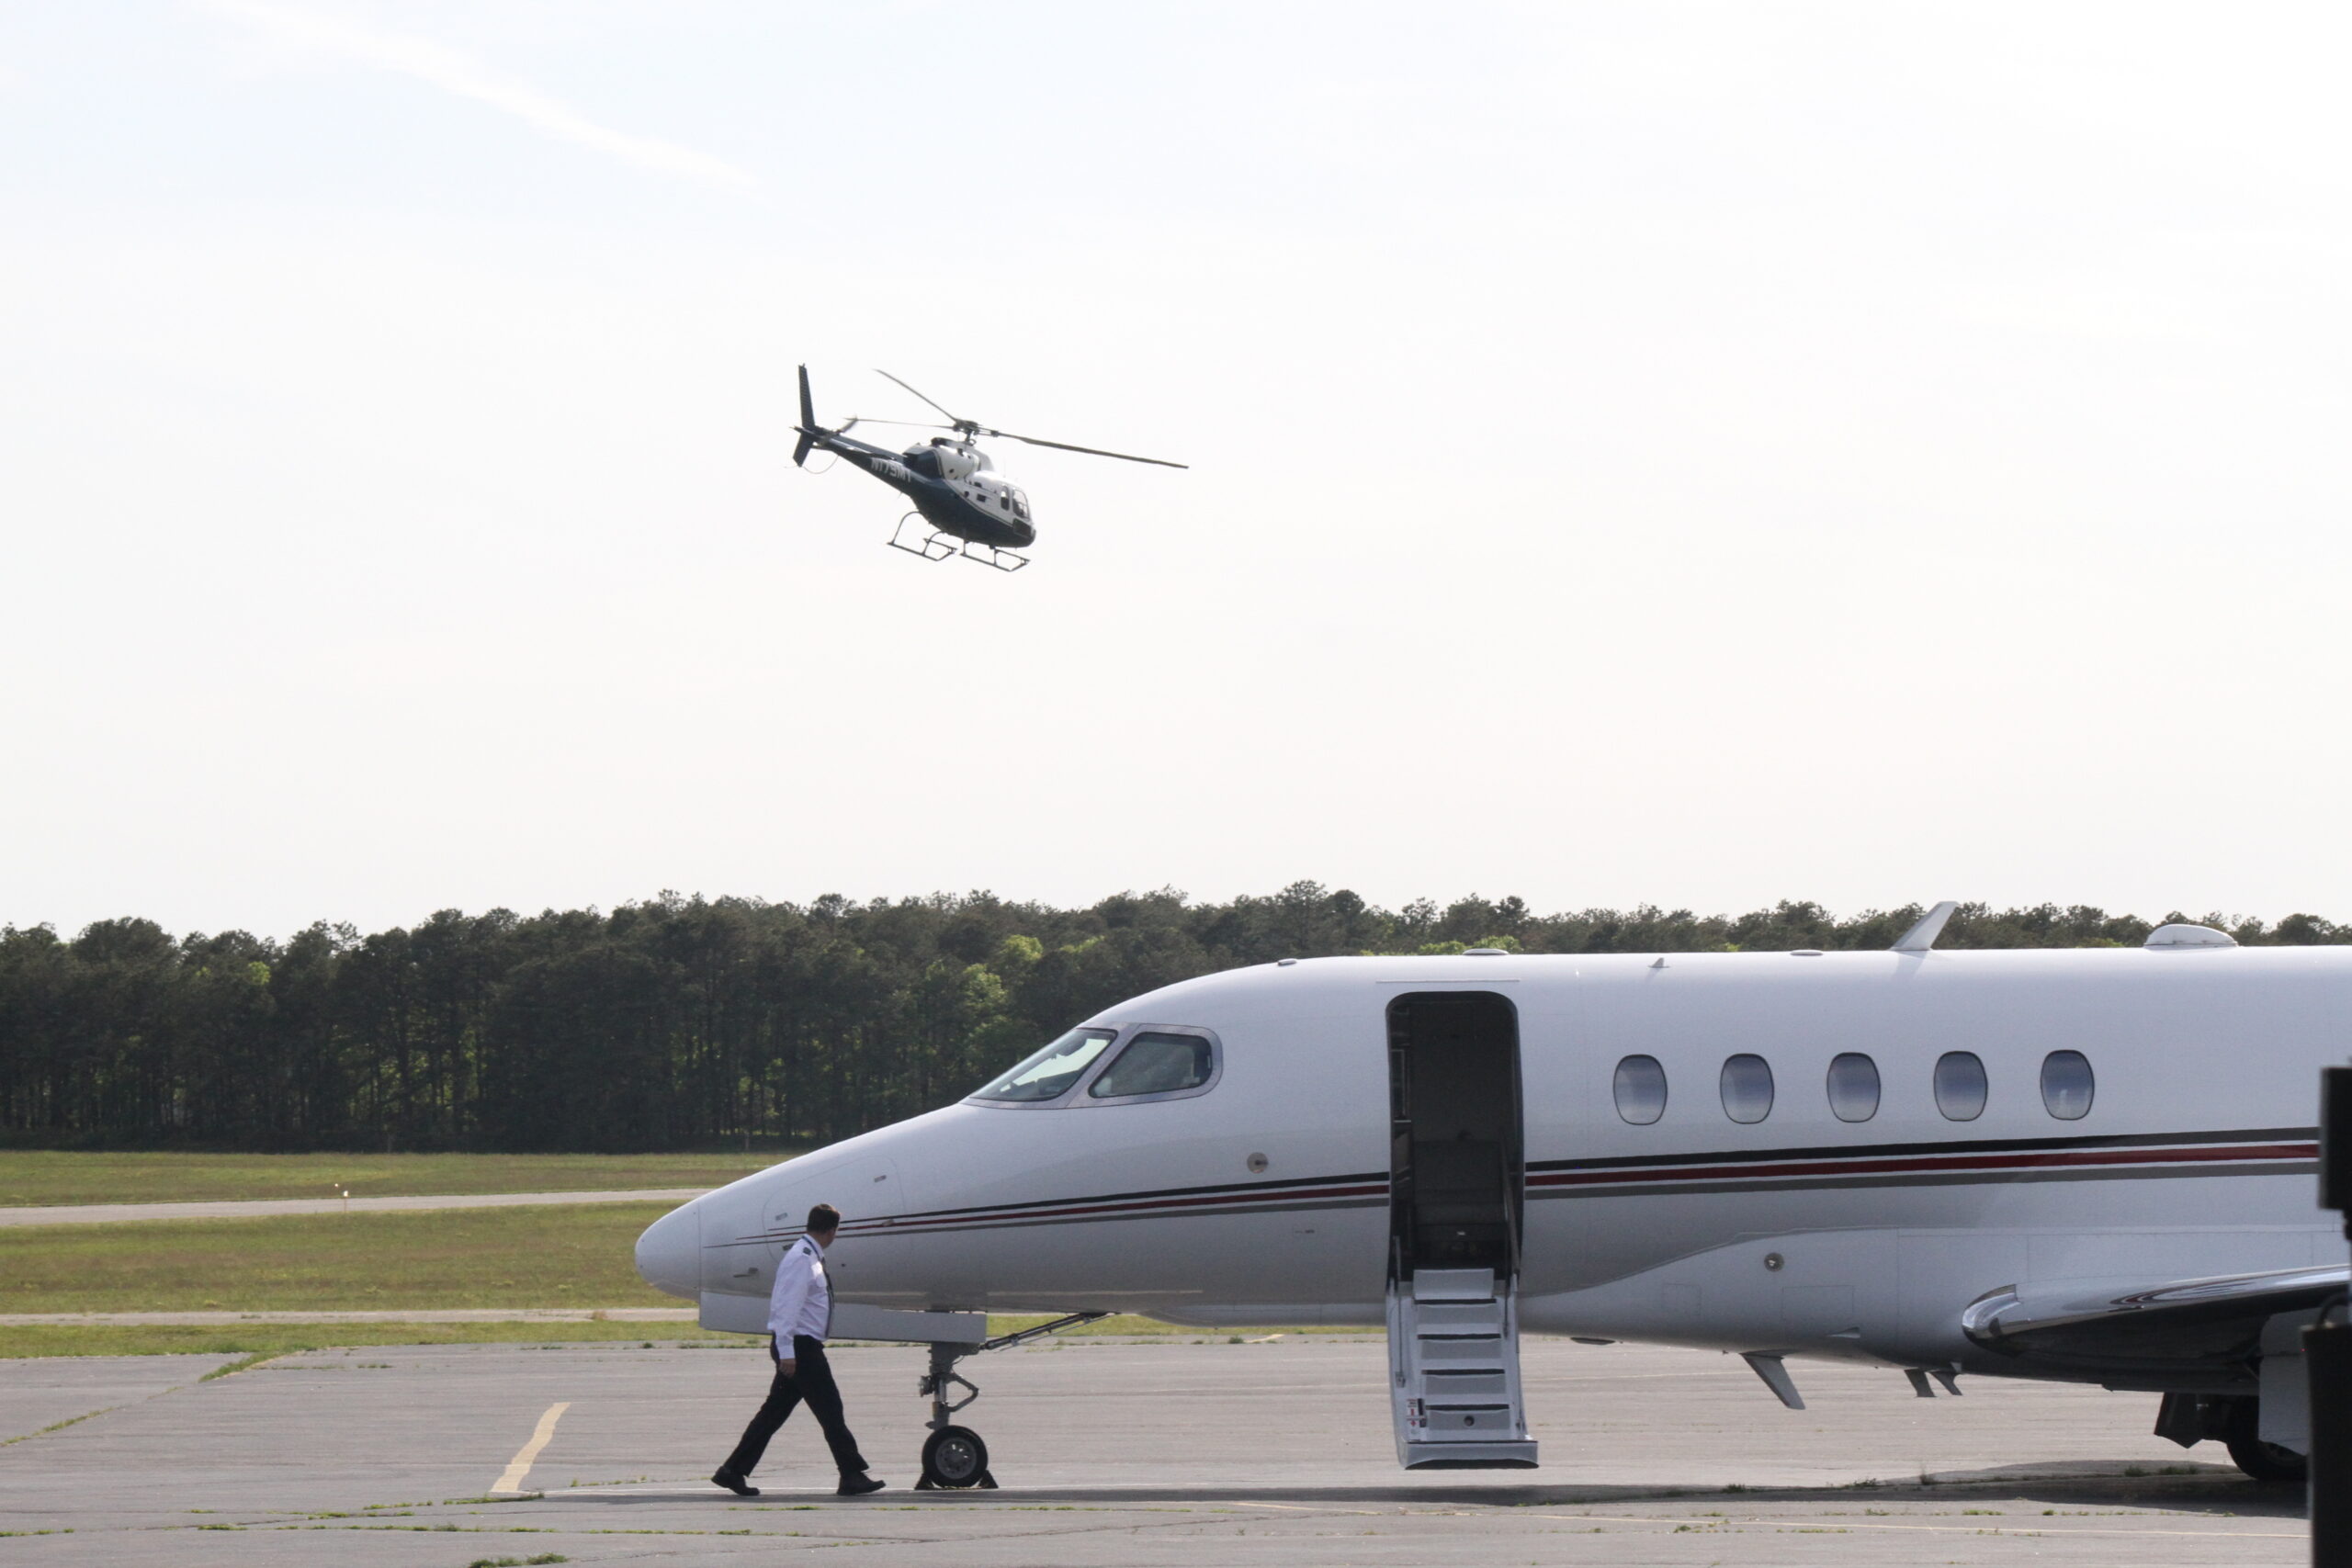 After a judge blocked its previous approach, the East Hampton Town Board will start anew with its planning for imposing restrictions at East Hampton Airport, potentially by summer 2023.